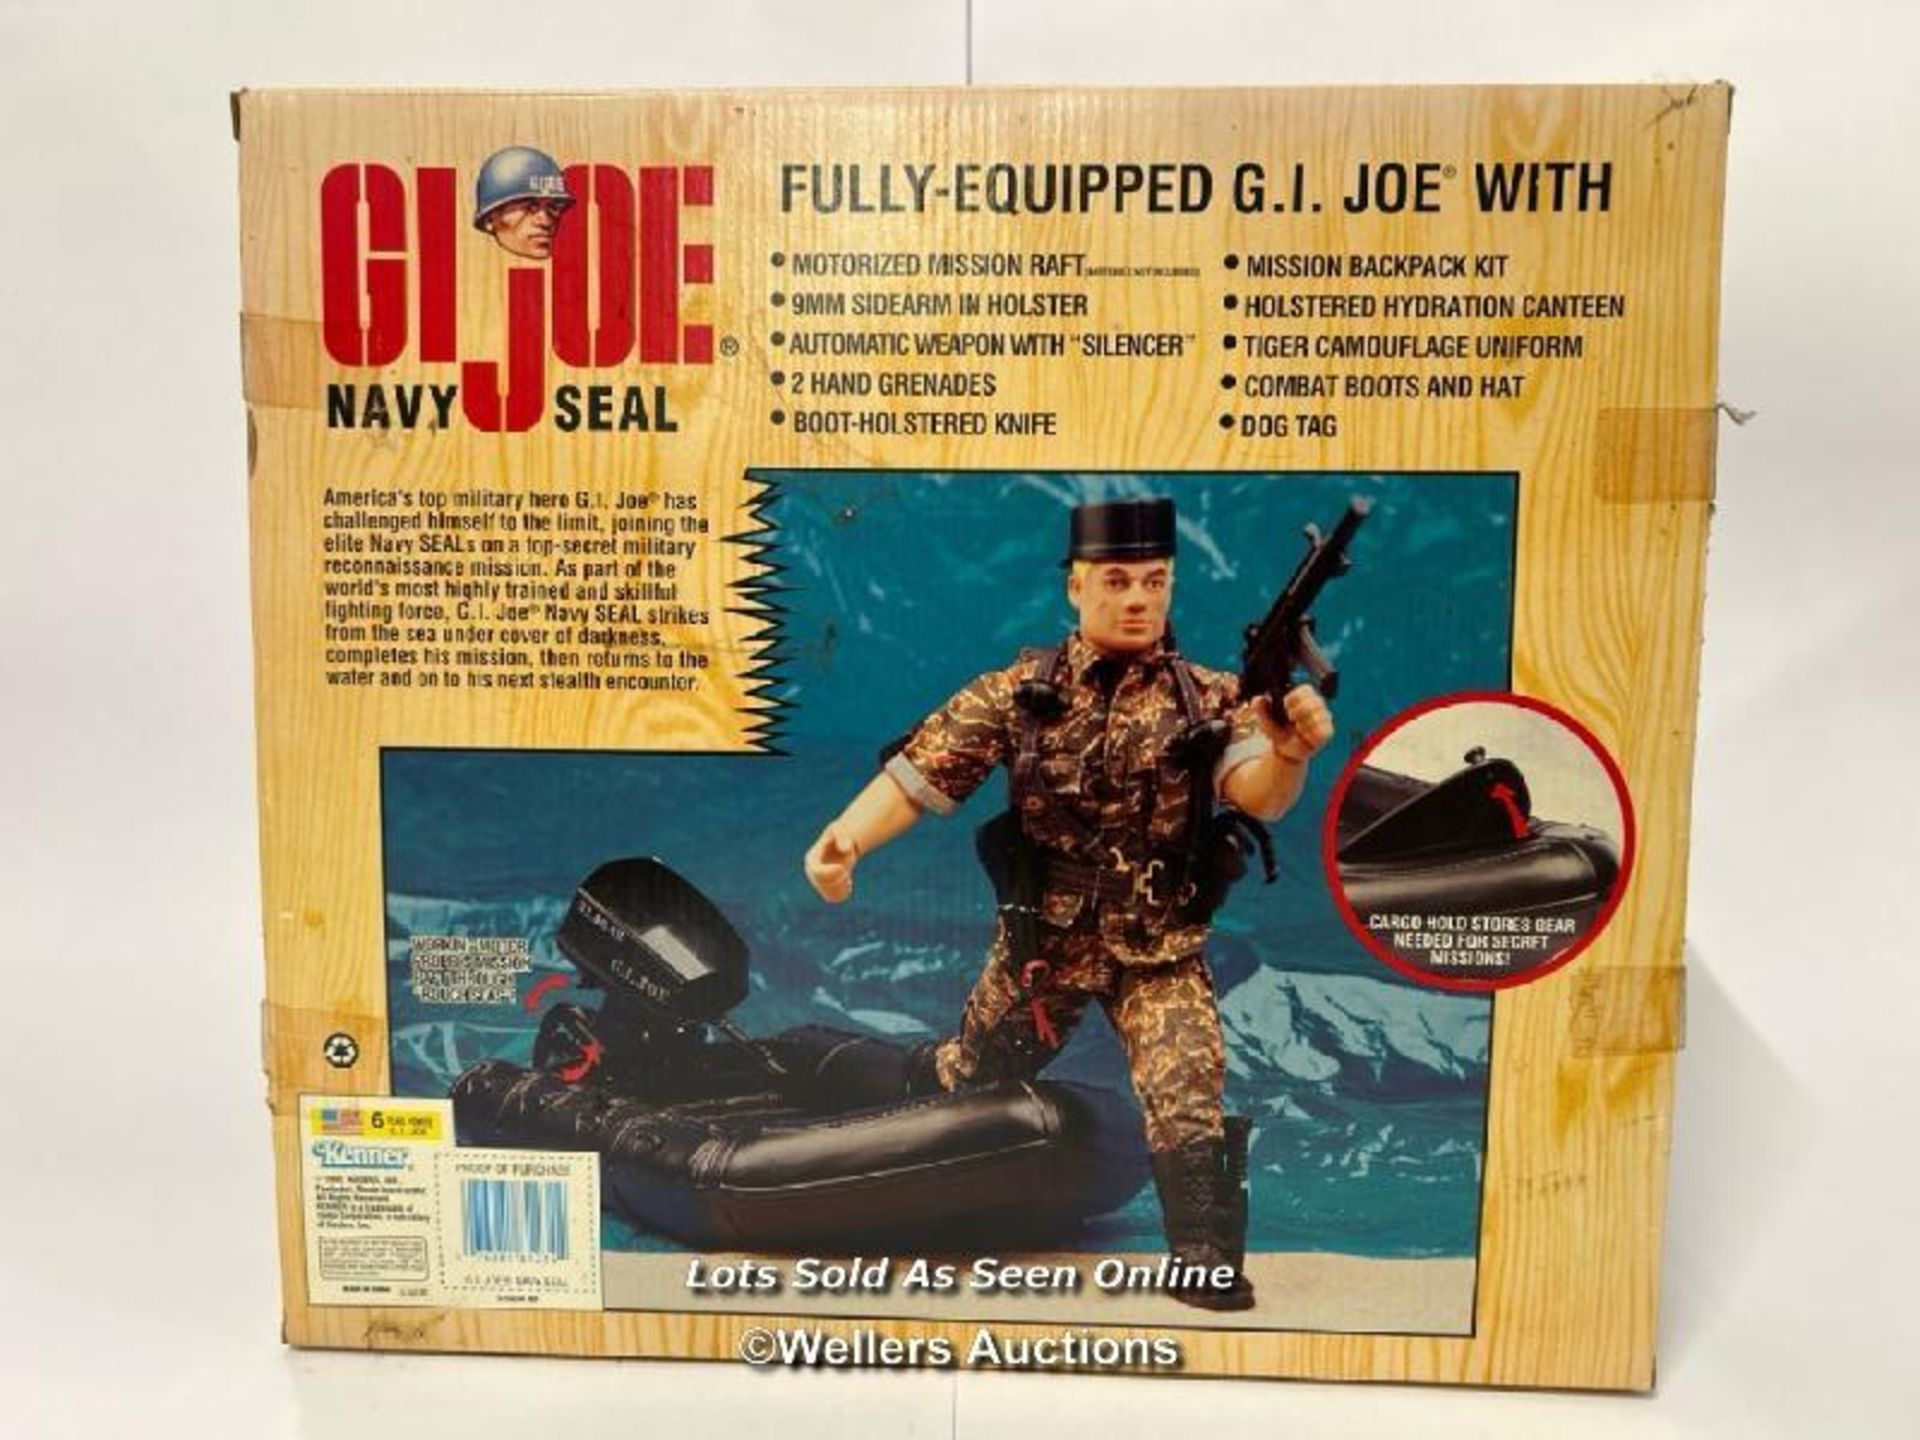 Kenner GI Joe 12" Navy Seal with Mission Raft, F.A.O. Schwartz special edition, 1995. unopened but - Image 2 of 4